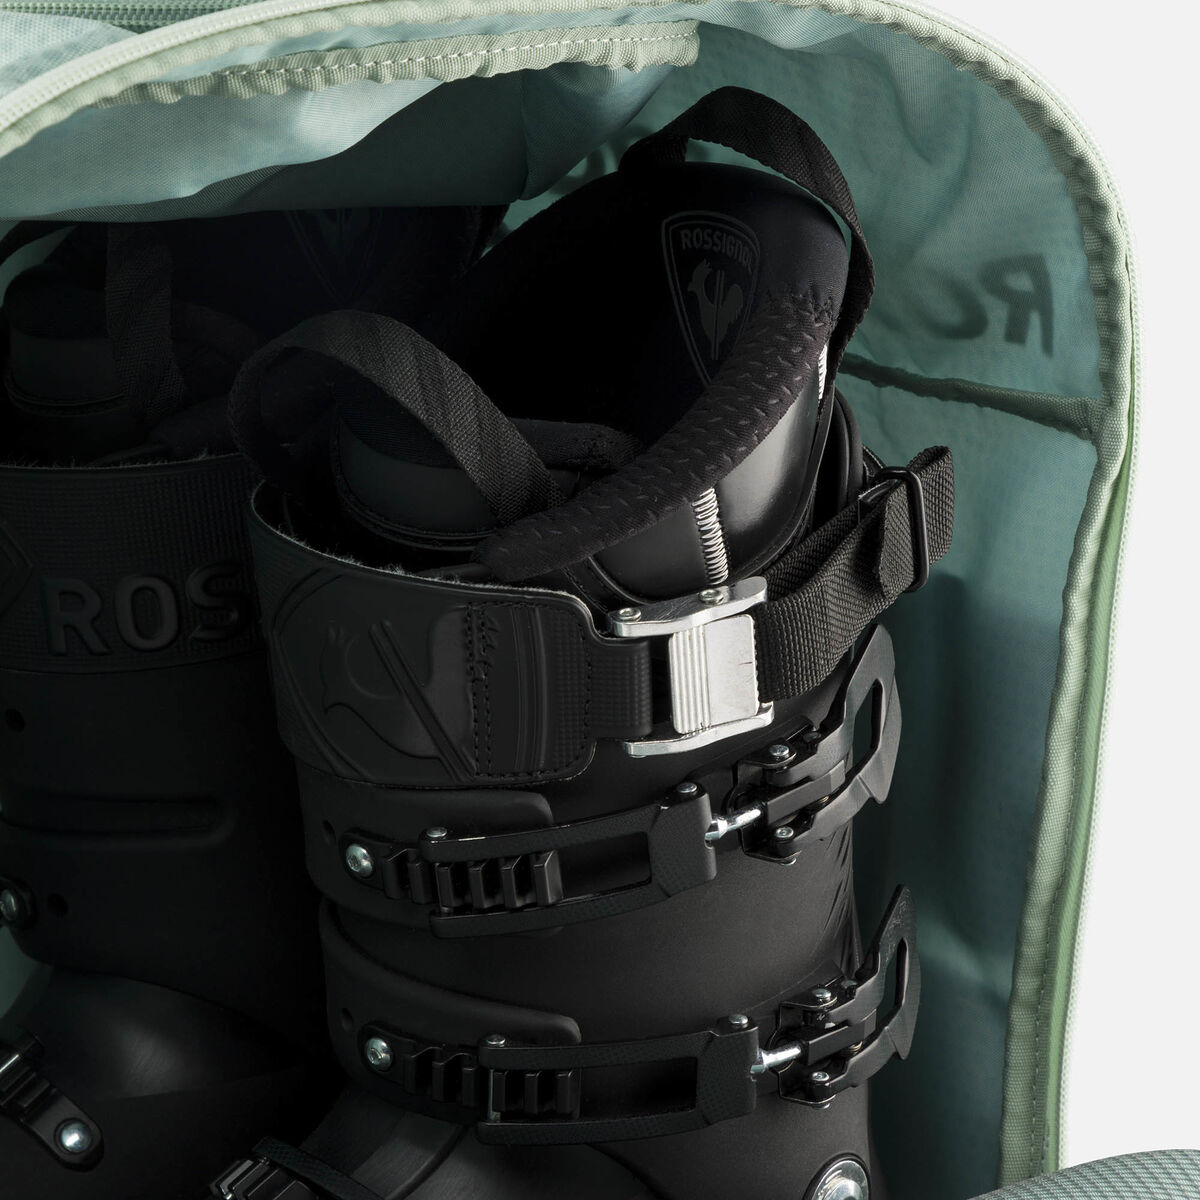 ELECTRA BOOT AND HELMET PACK